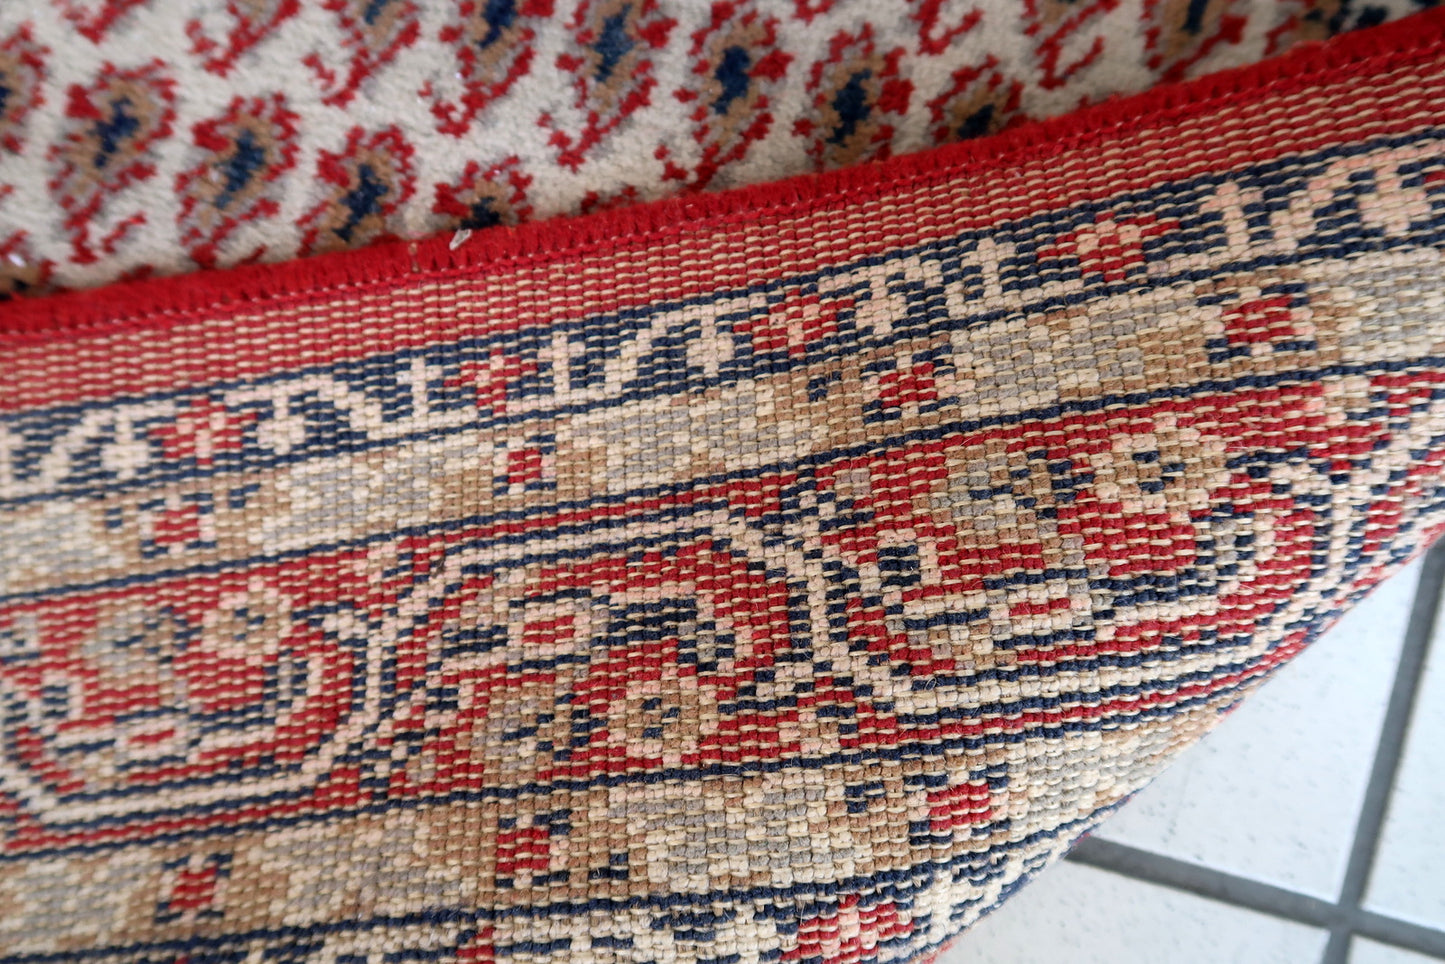 Vintage Italian rug with Seraband design made by Roma Super company. The rug is from the end of 20th century, it is in original good condition. This rug is machine made